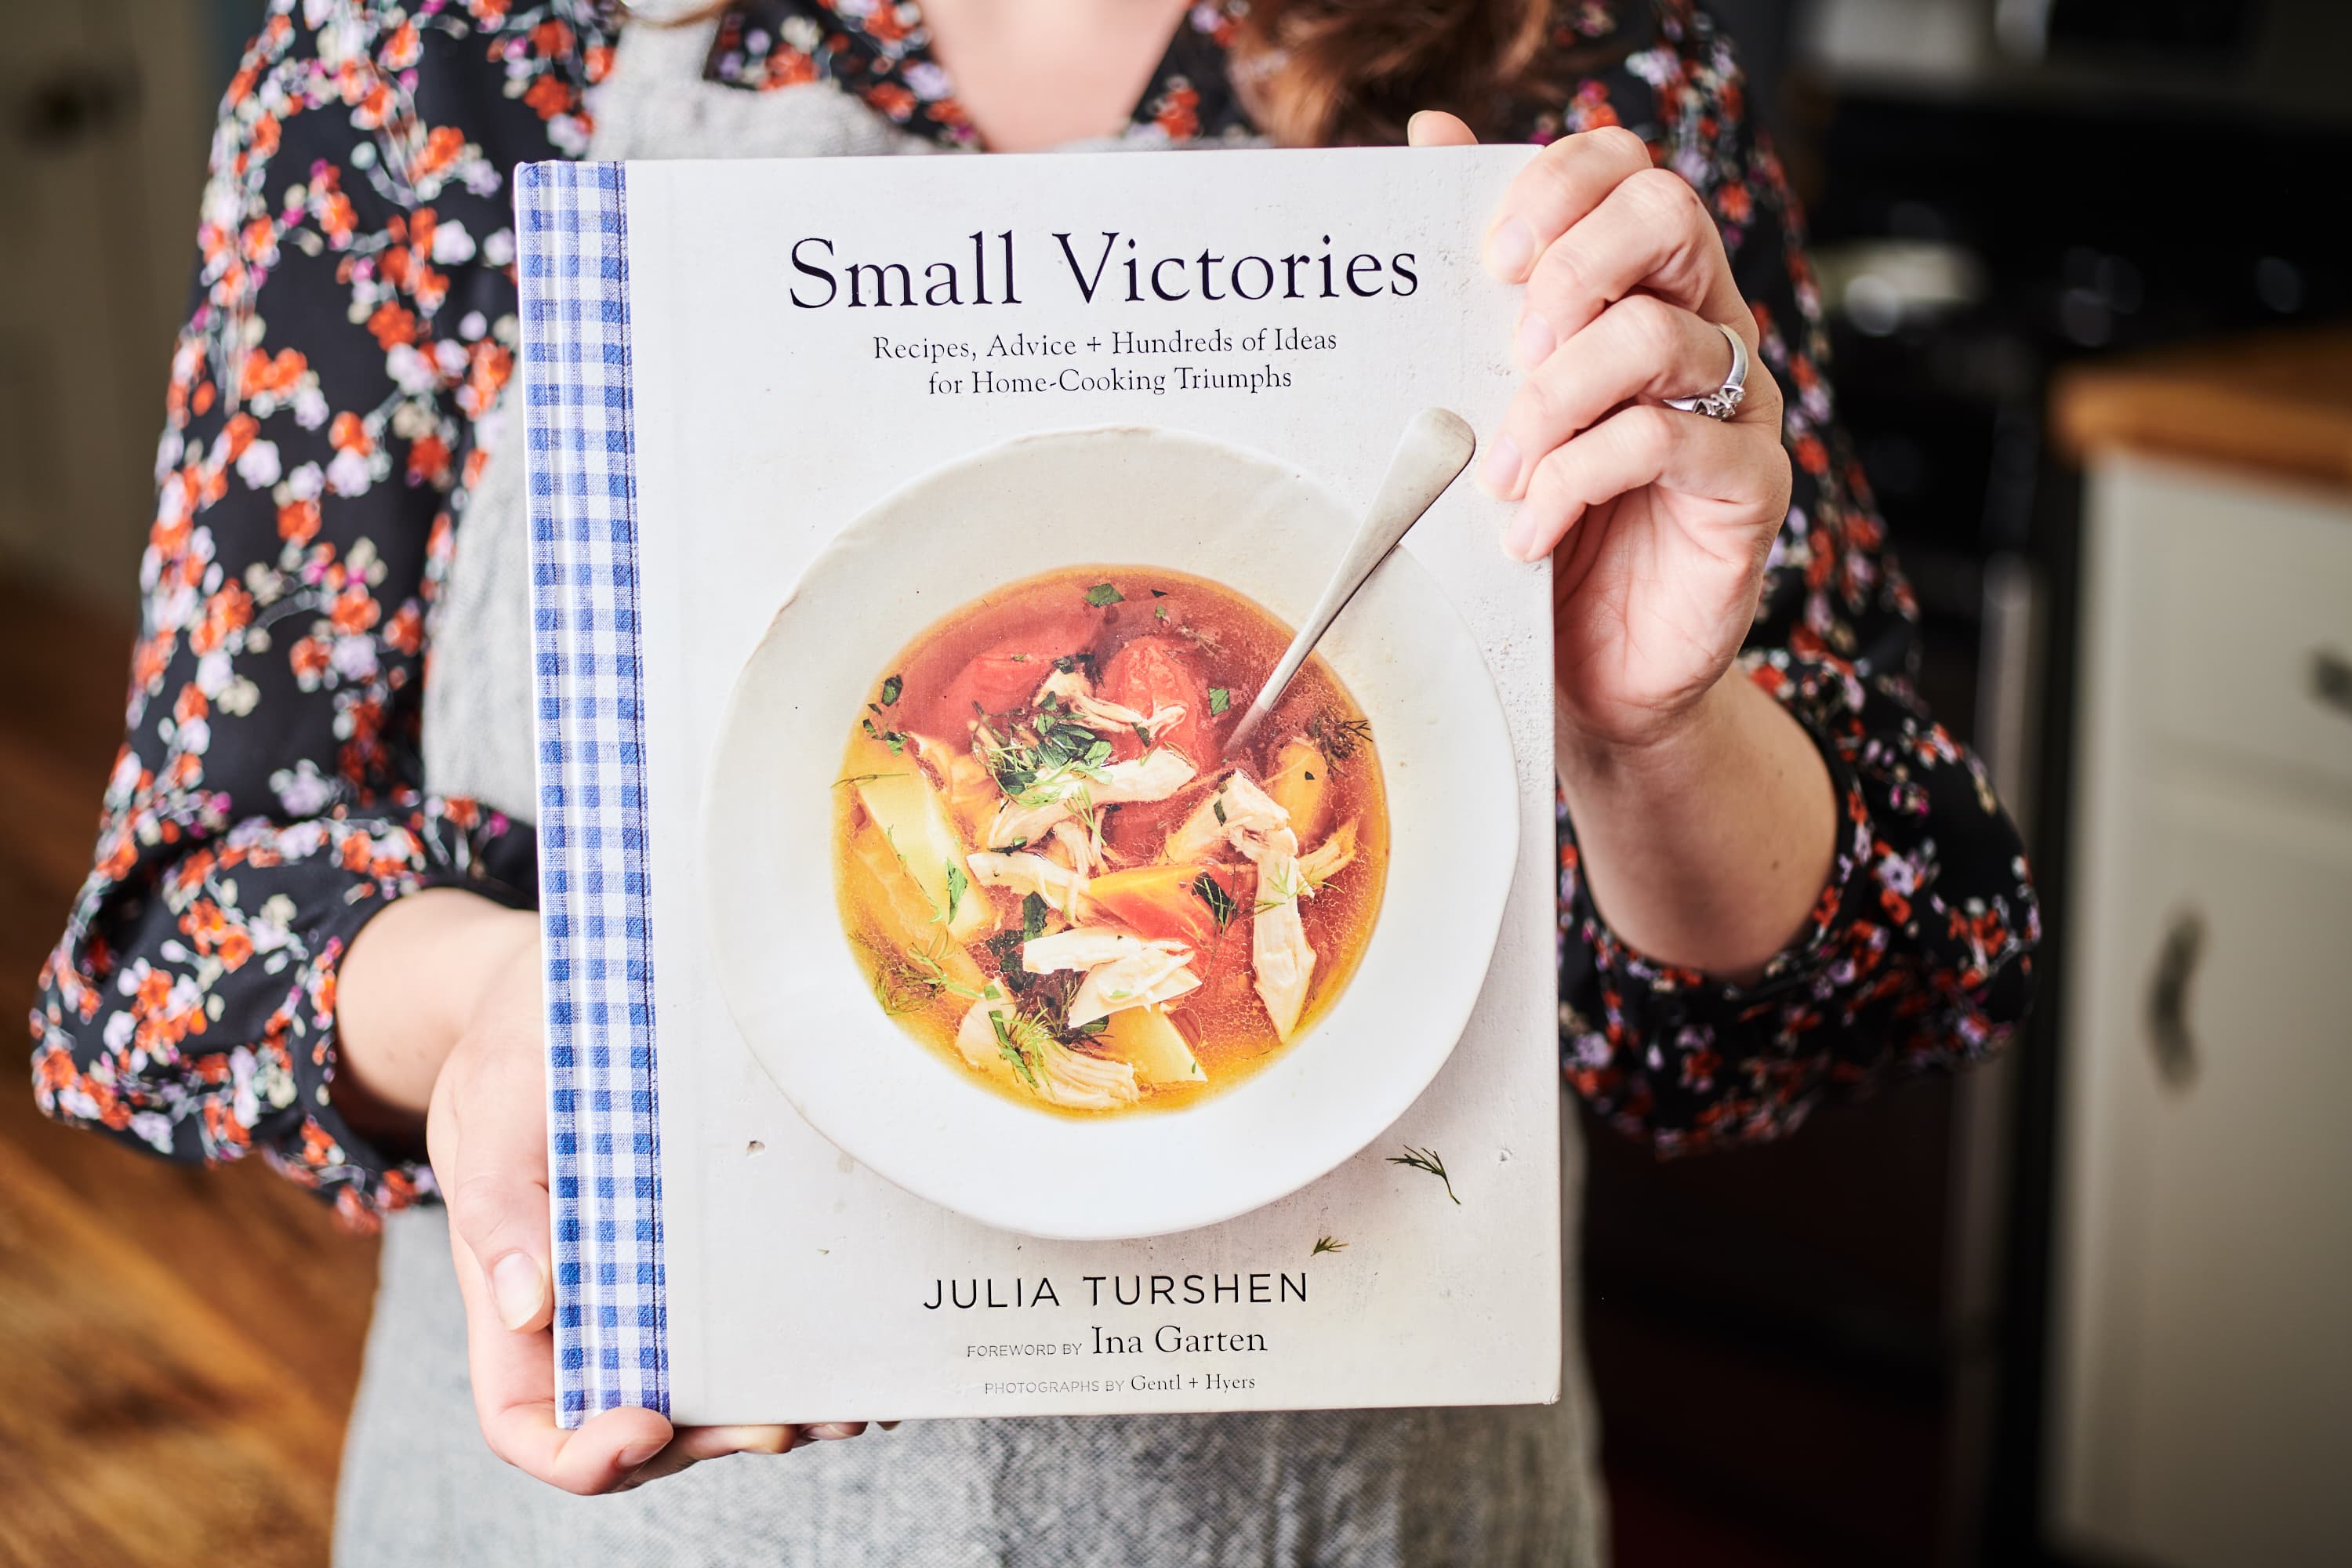 Small Victories: Recipes, Advice + Hundreds of Ideas for Home Cooking Triumphs (Best Simple Recipes, Simple Cookbook Ideas, Cooking Techniques Book) [Book]